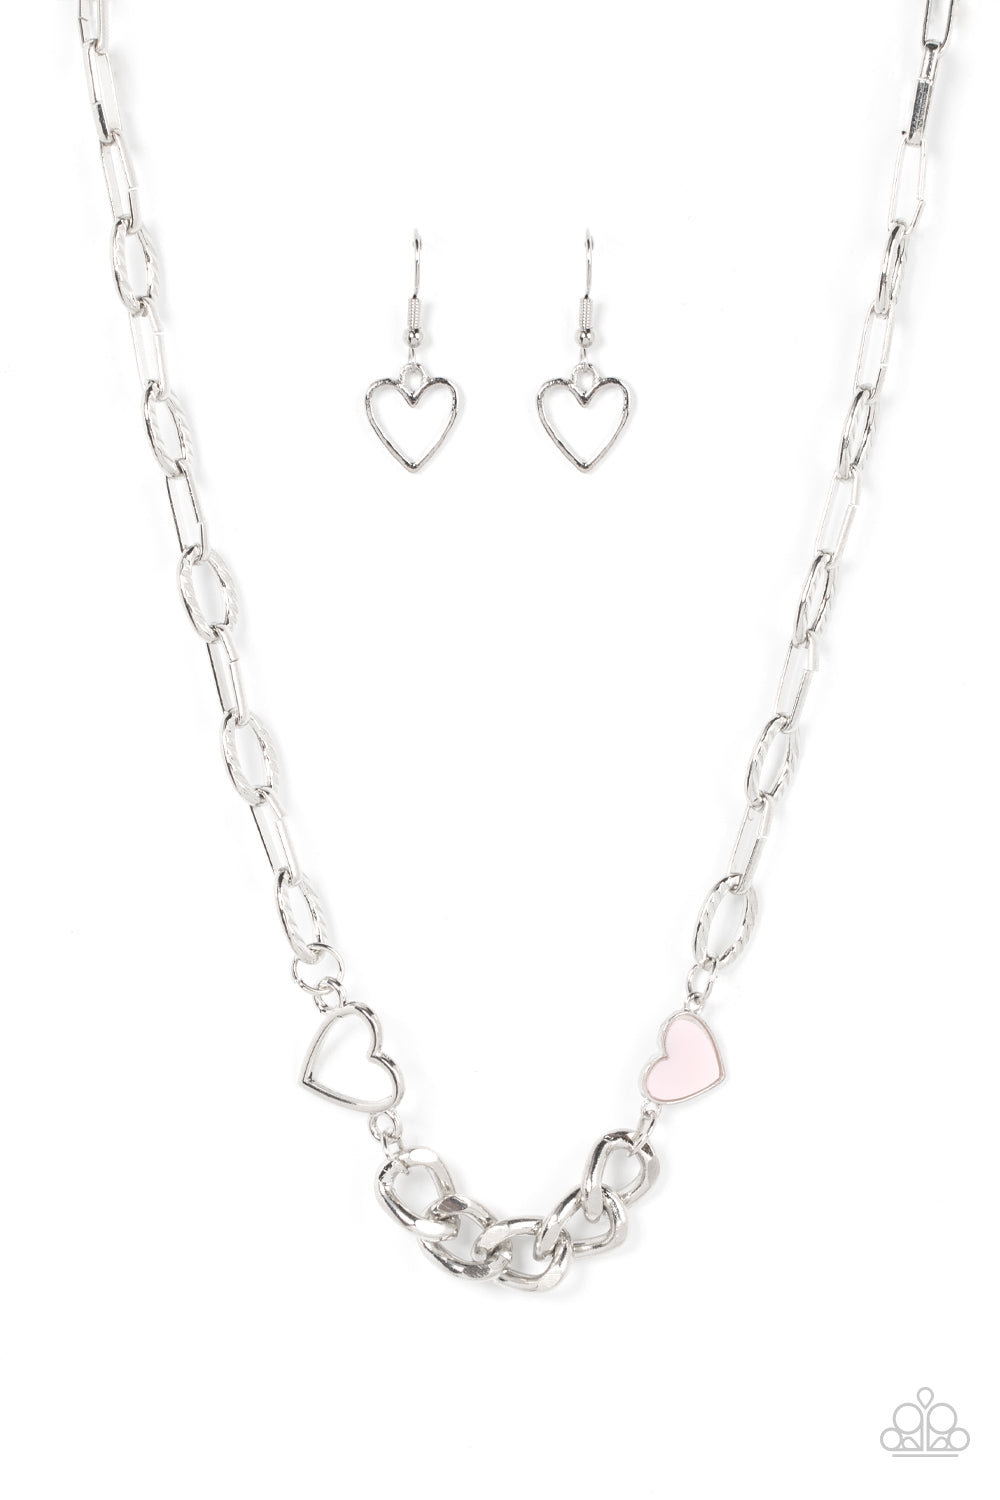 Little Charmer - Pink Heart and Silver Necklace - Paparazzi Accessories - Shiny silver and Pale Rosette hearts asymmetrically adorn sections of mismatched silver chain, resulting in a flirtatious pop of color below the collar. Features an adjustable clasp closure.